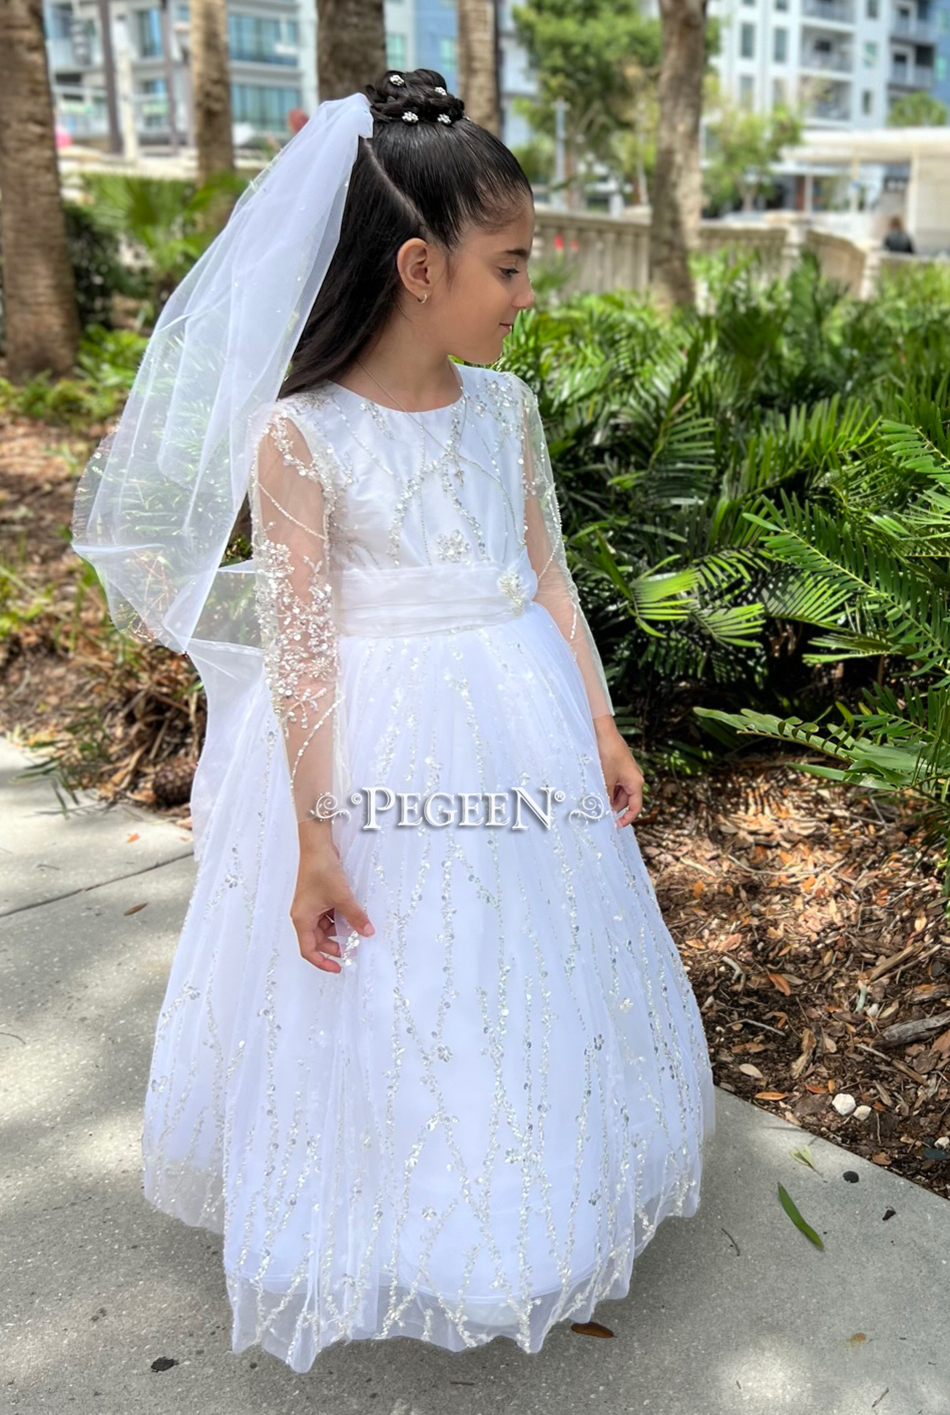 Fairytale dress with elaborate beading and crystals used for First Communion